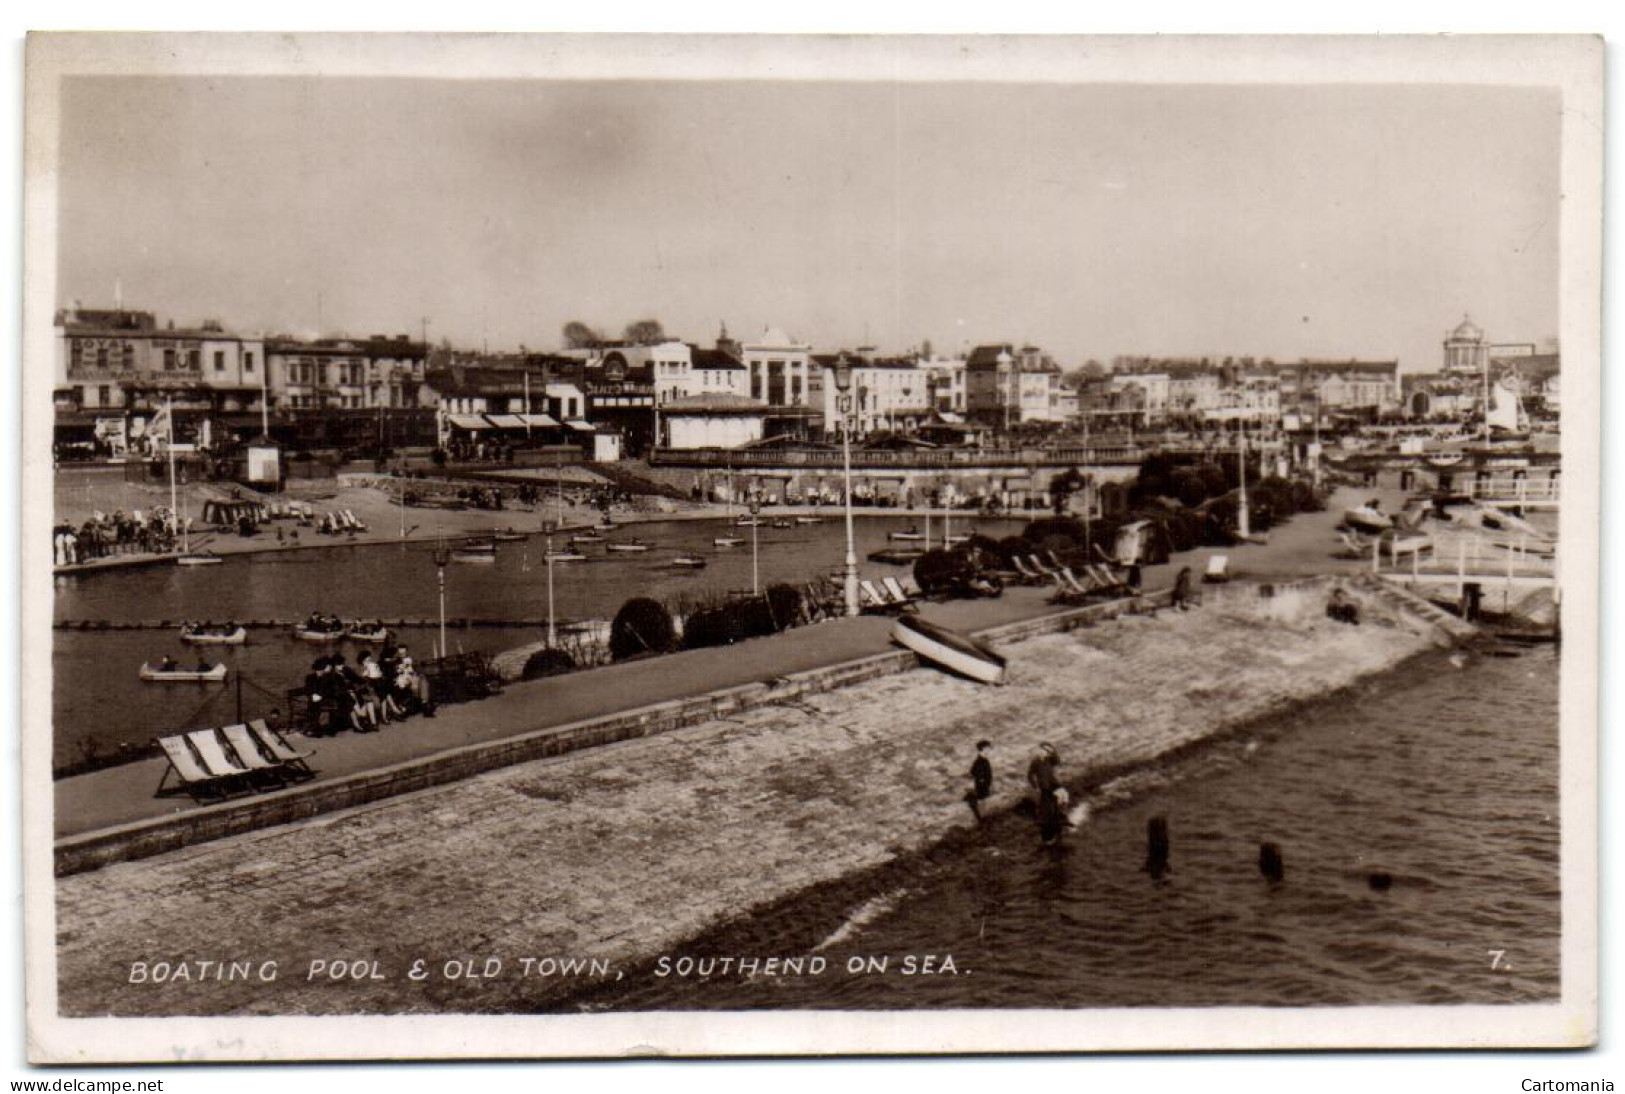 Boating Pool & Old Towns - Southend On Sea - Southend, Westcliff & Leigh